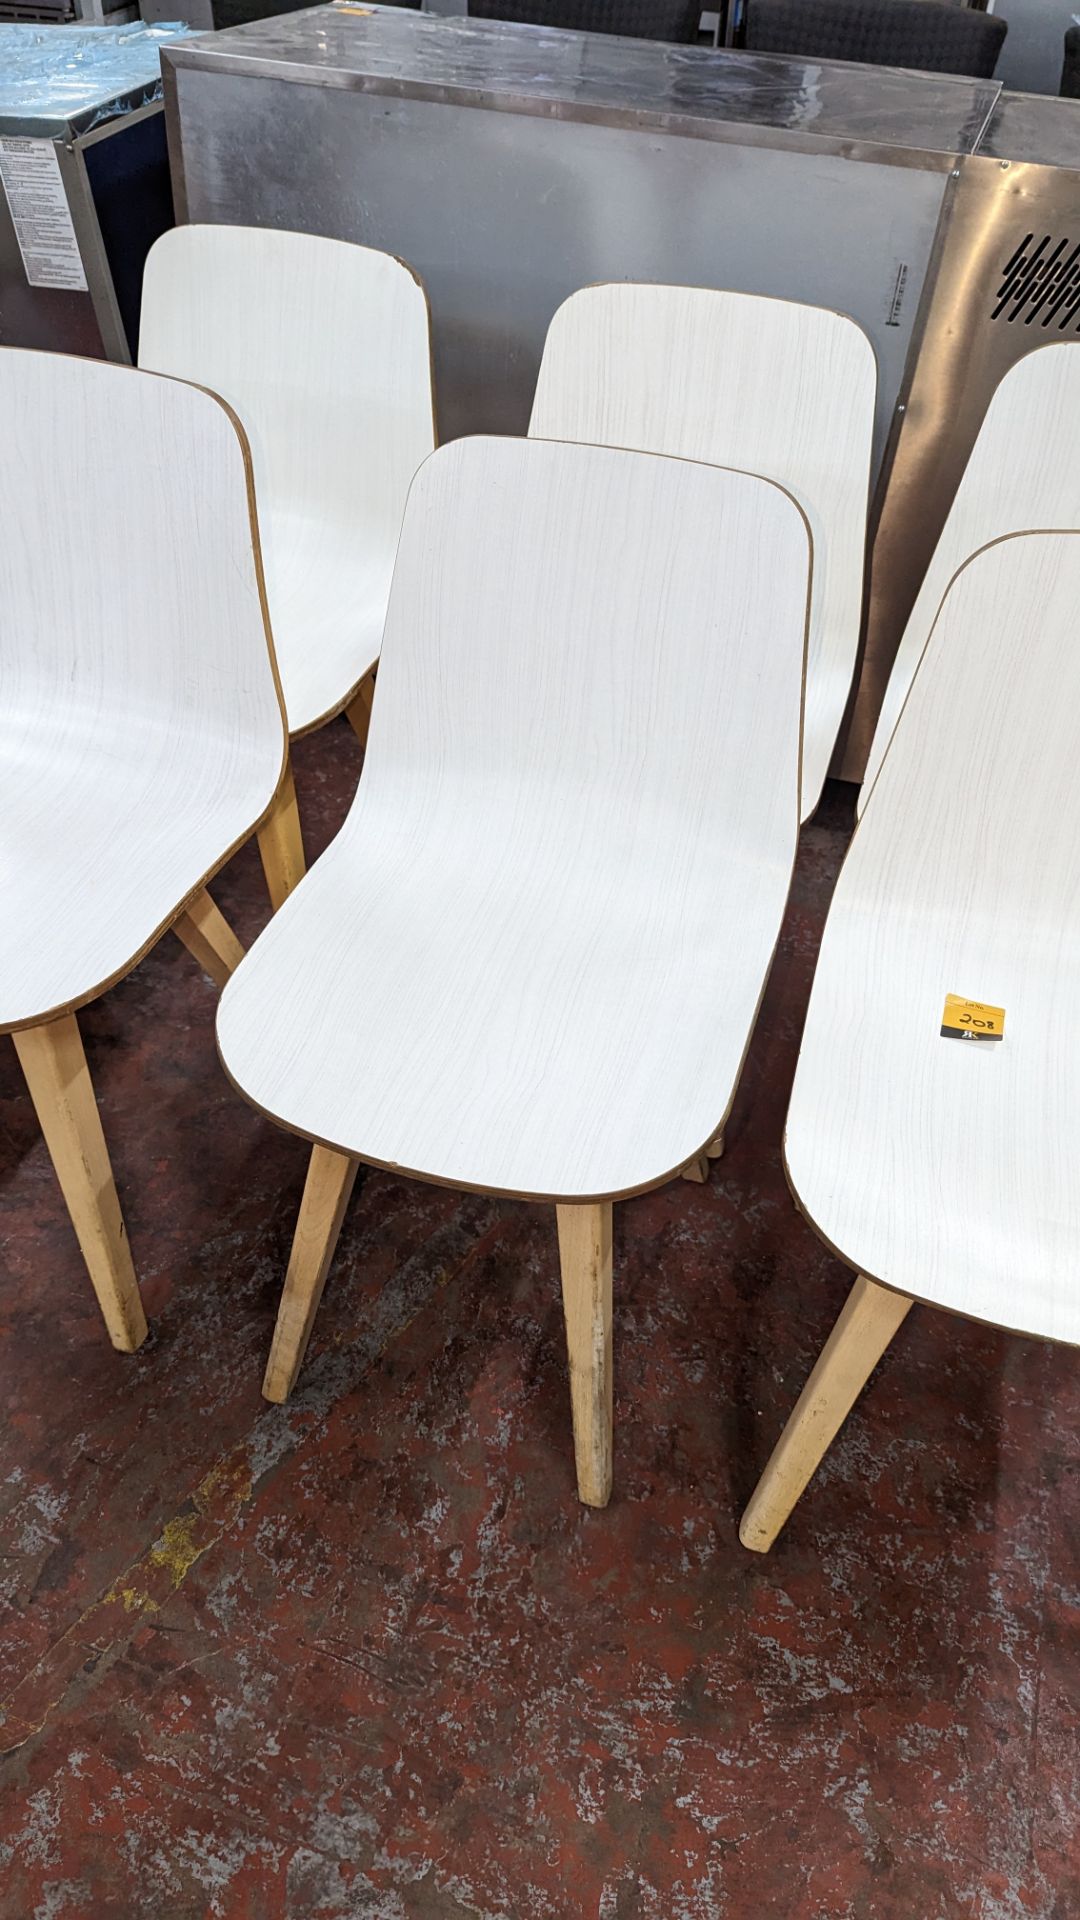 6 matching wooden chairs with white painted bases. NB these chairs look the same style, but a diffe - Image 4 of 5